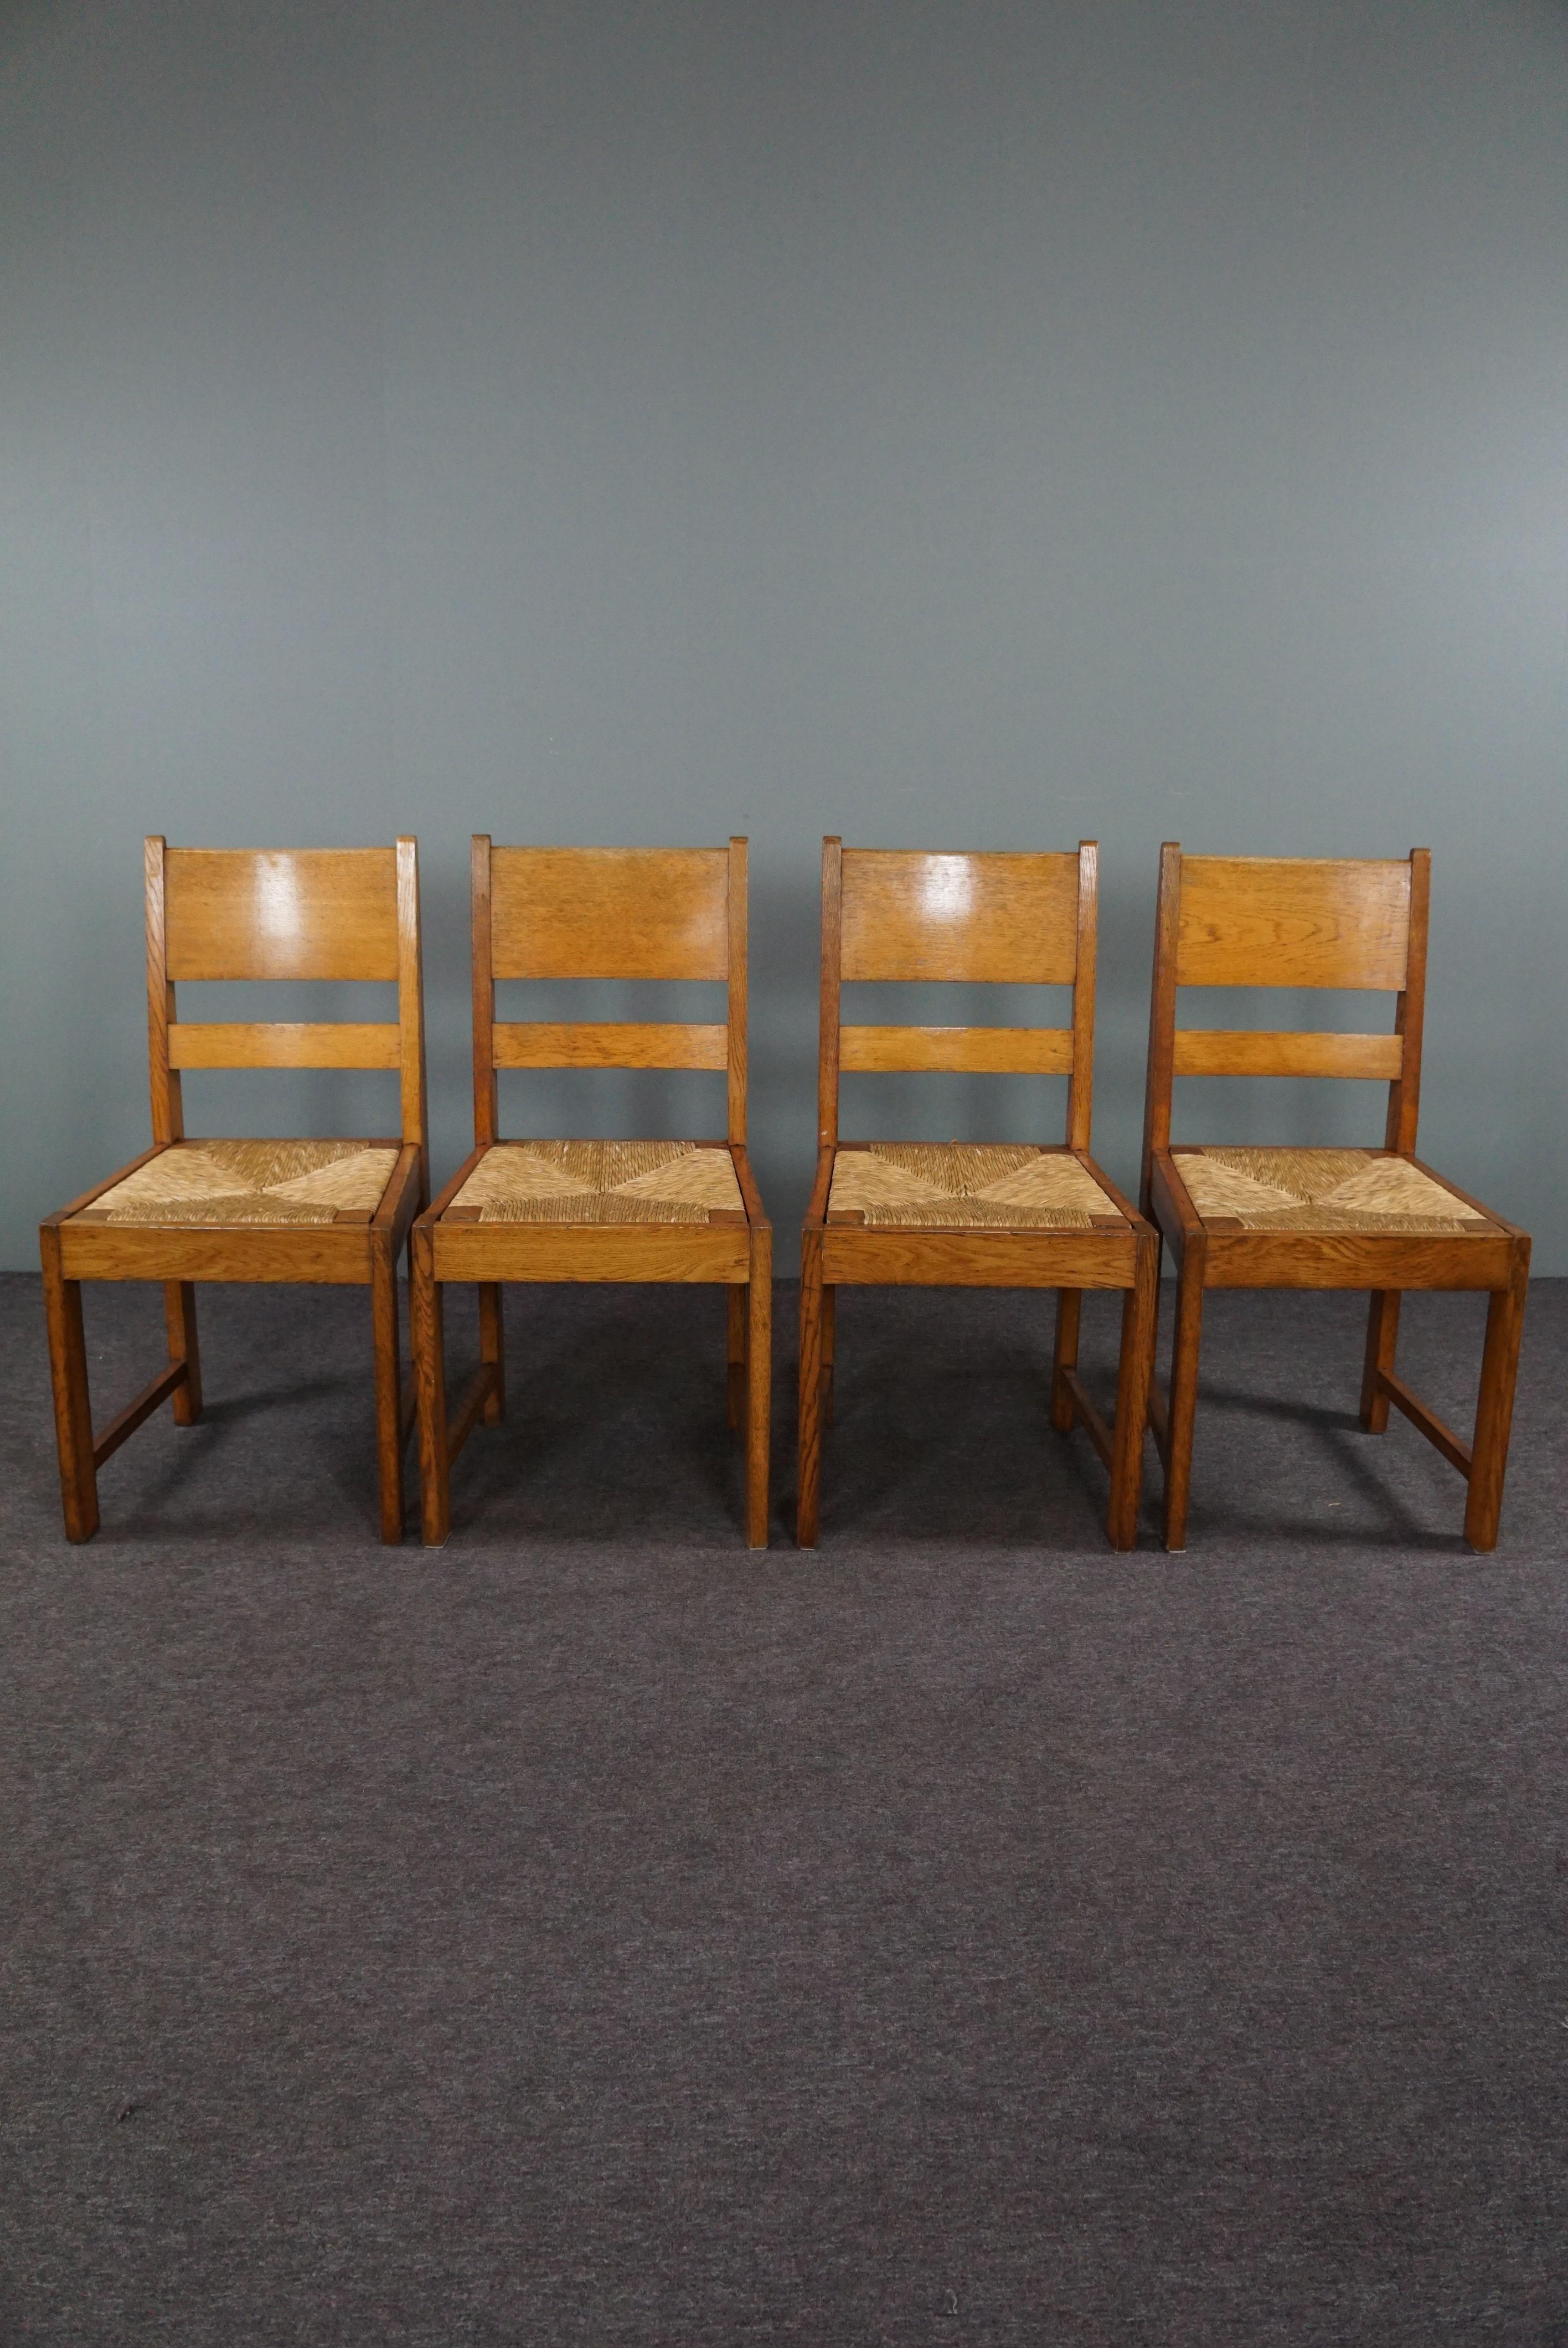 Offered is this very beautiful set of 4 oak The Hague School dining room chairs.

This rare set of dining room chairs in The Hague School style was developed around 1940. The seating of this set is very comfortable and such furniture fits well in